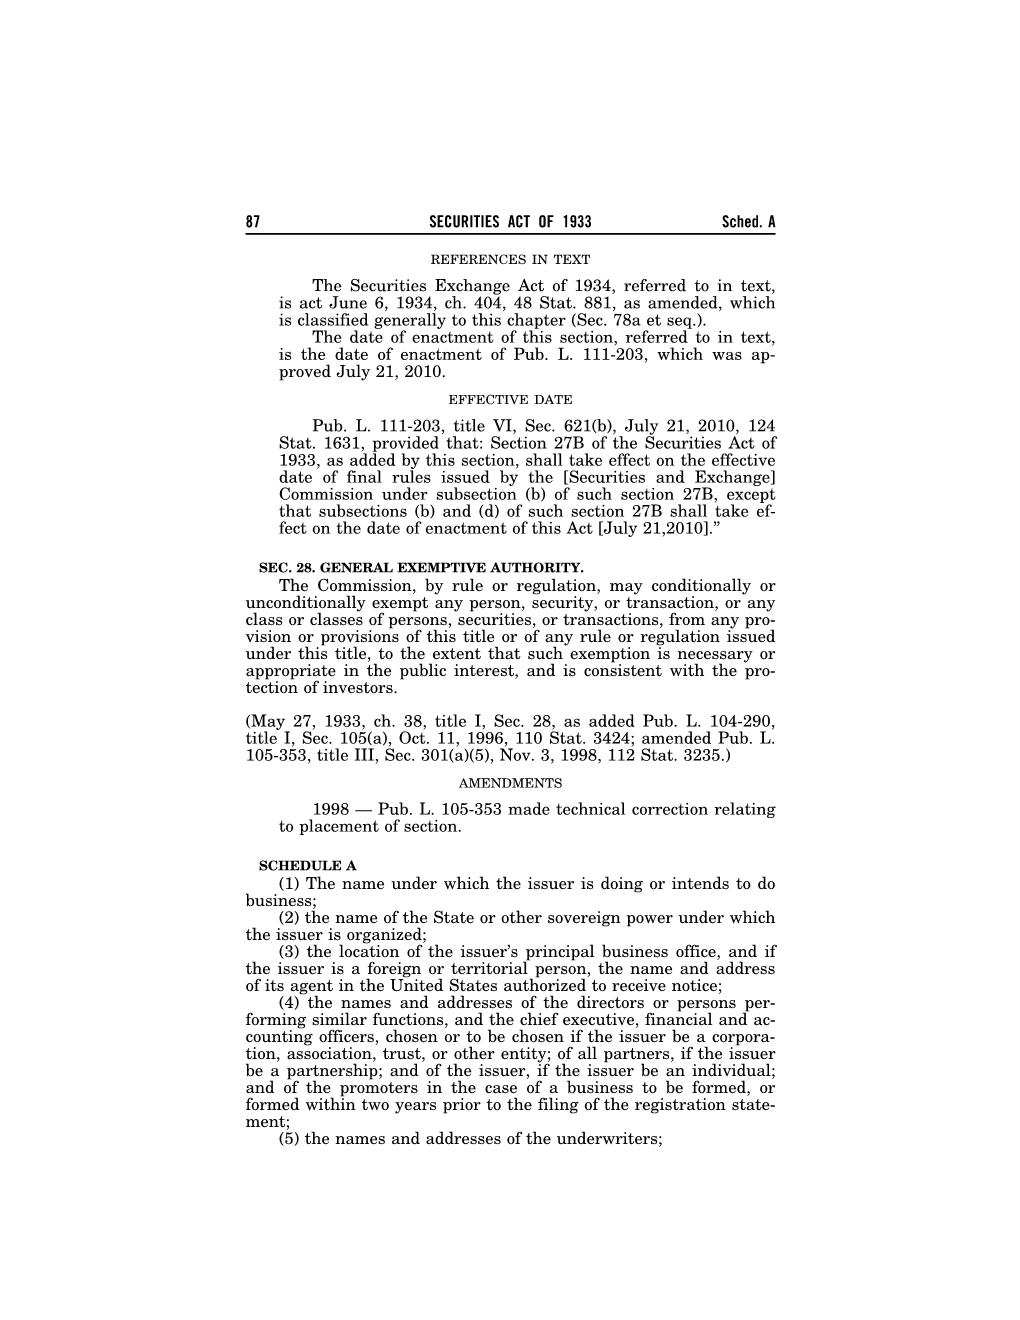 Securities Act of 1933 Section 28